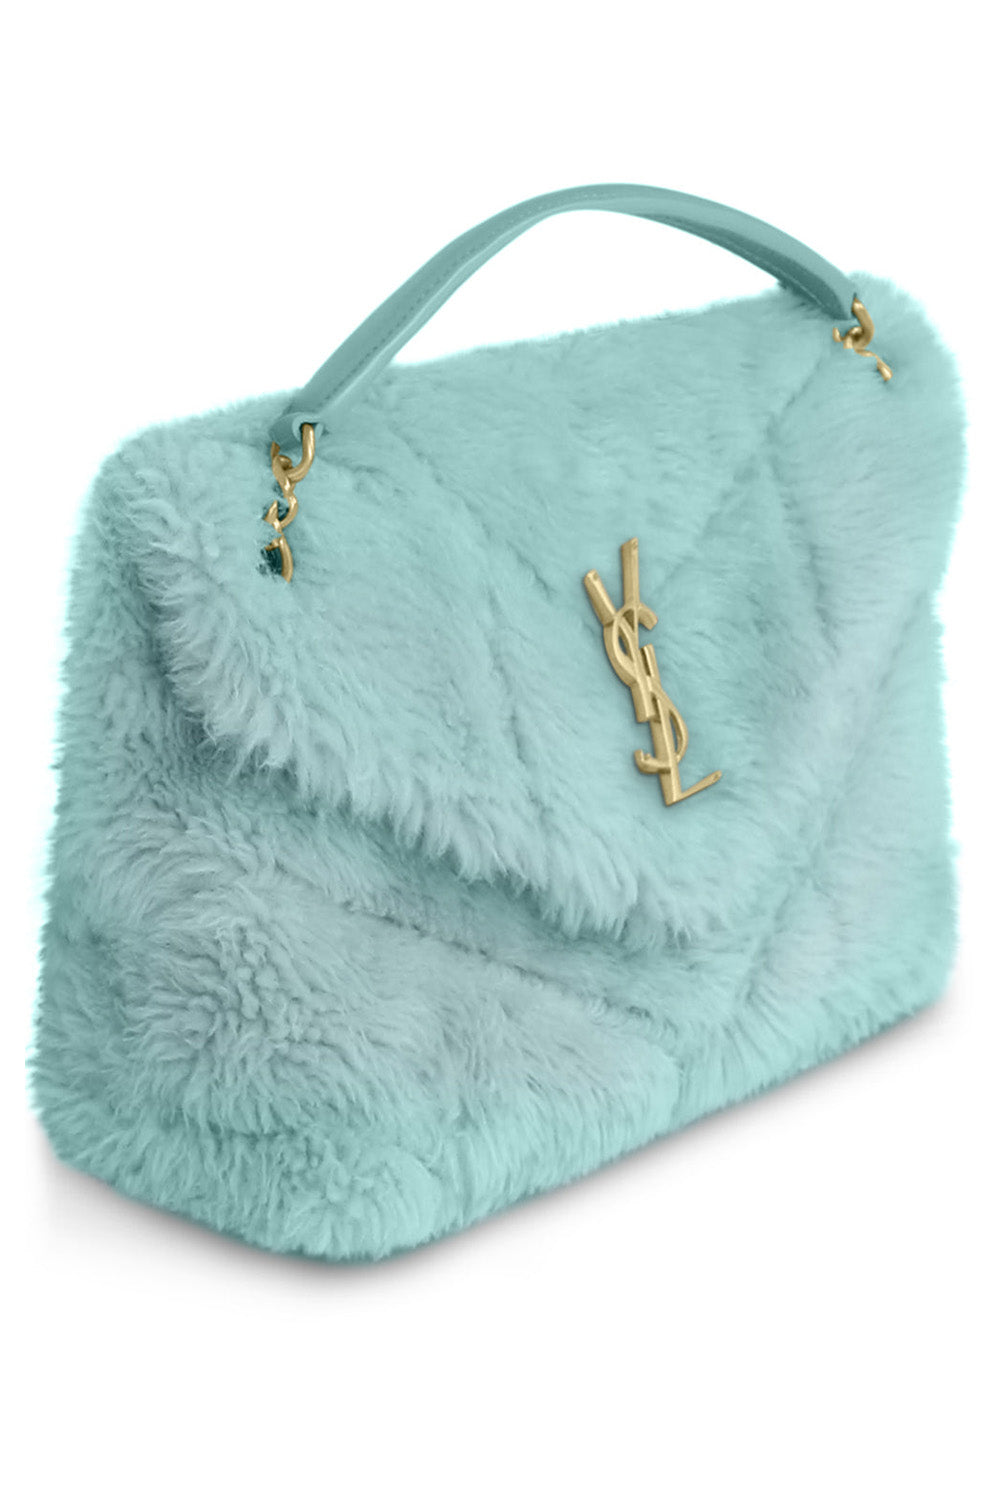 SAINT LAURENT BAGS GREEN LOULOU SMALL SHEARLING PUFFER BAG | ICED MINT